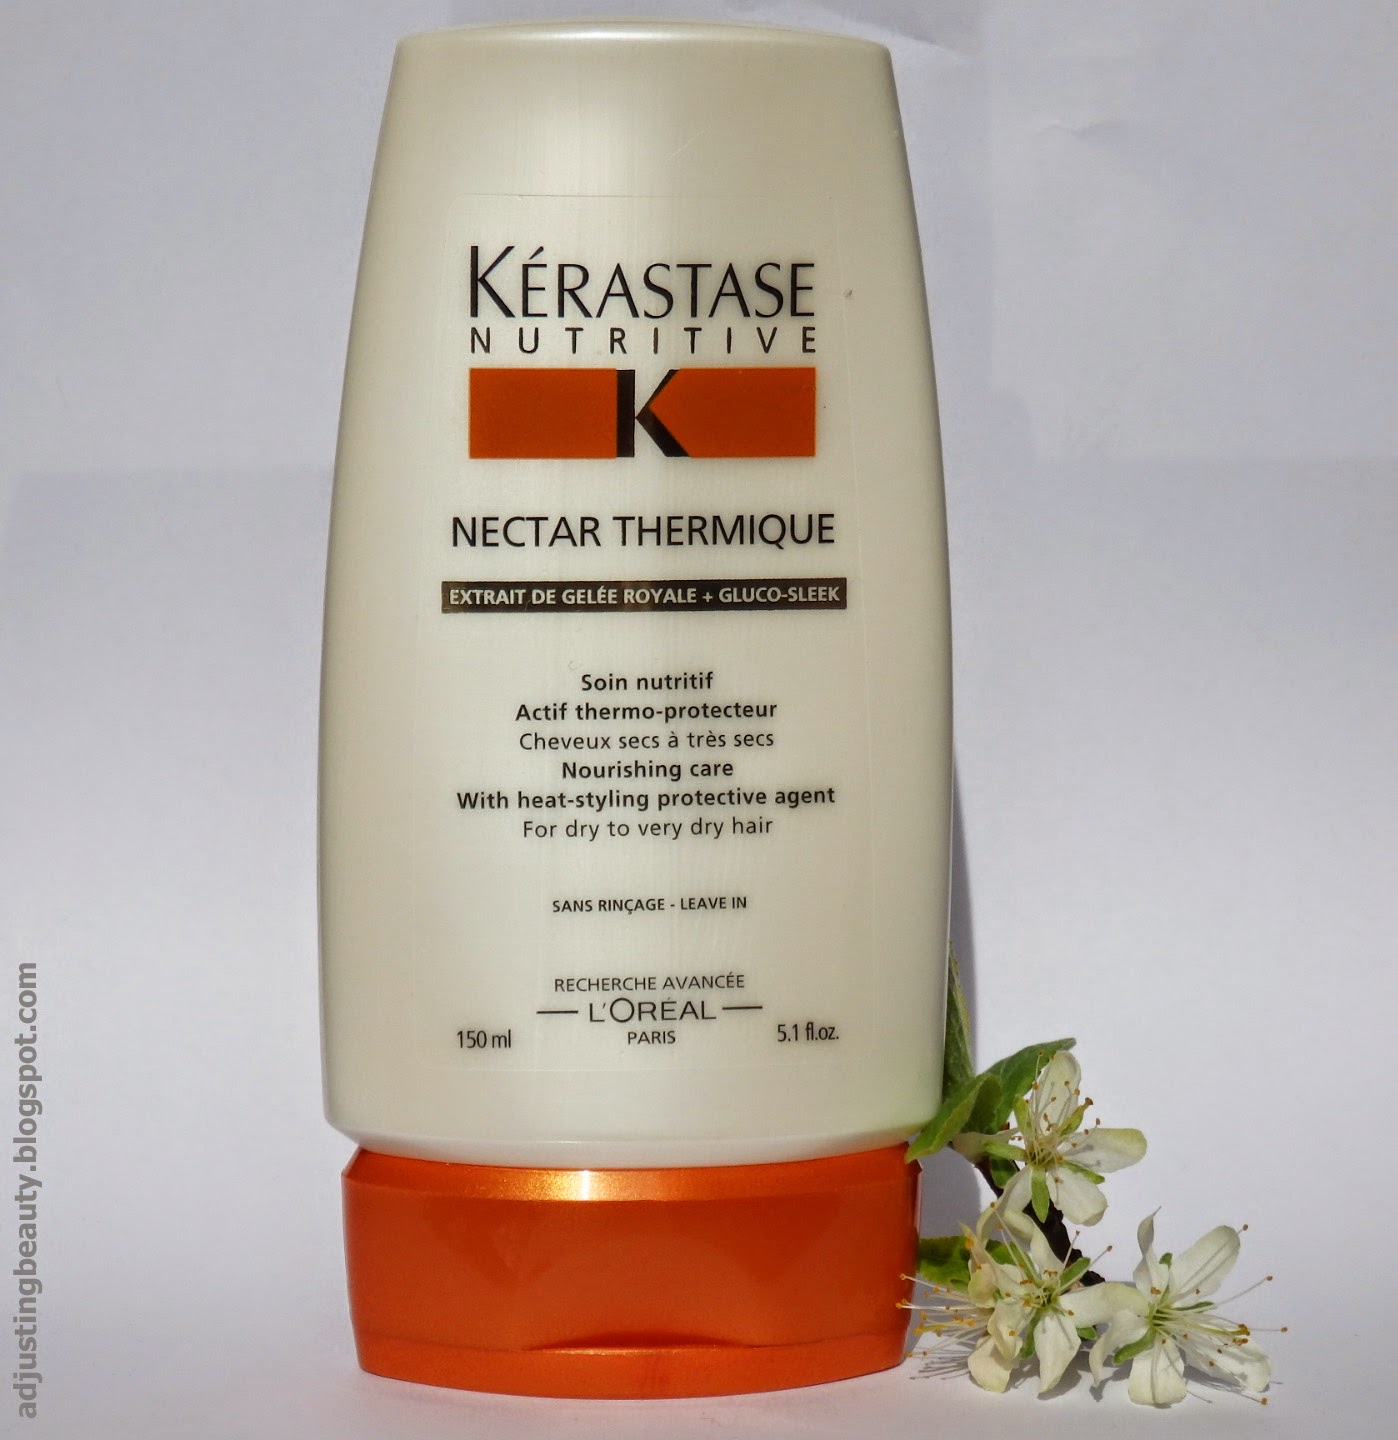 Kérastase Nutritive Nectar Thermique Nourishing Care With Protective - Adjusting Beauty